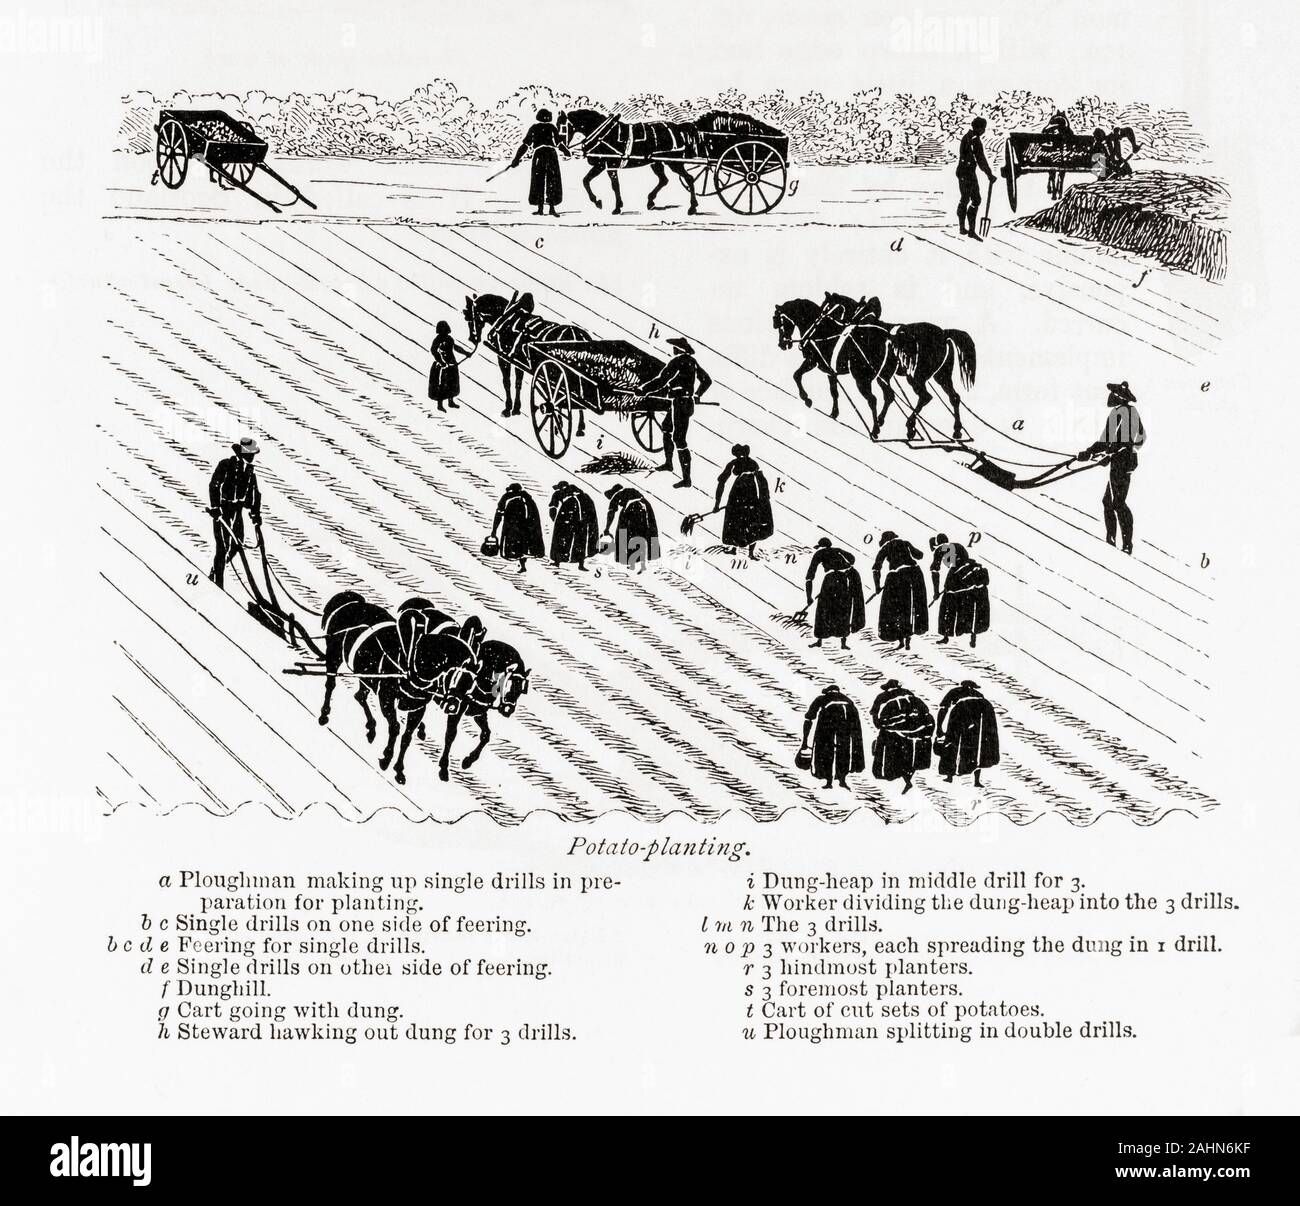 Potato planting.   From The Book of the Farm by Scottish farmer and agriculturalist Henry Stephens, 1795 - 1874, first published in the 1840’s.  This illustration from a revised 1870’s edition. Stock Photo